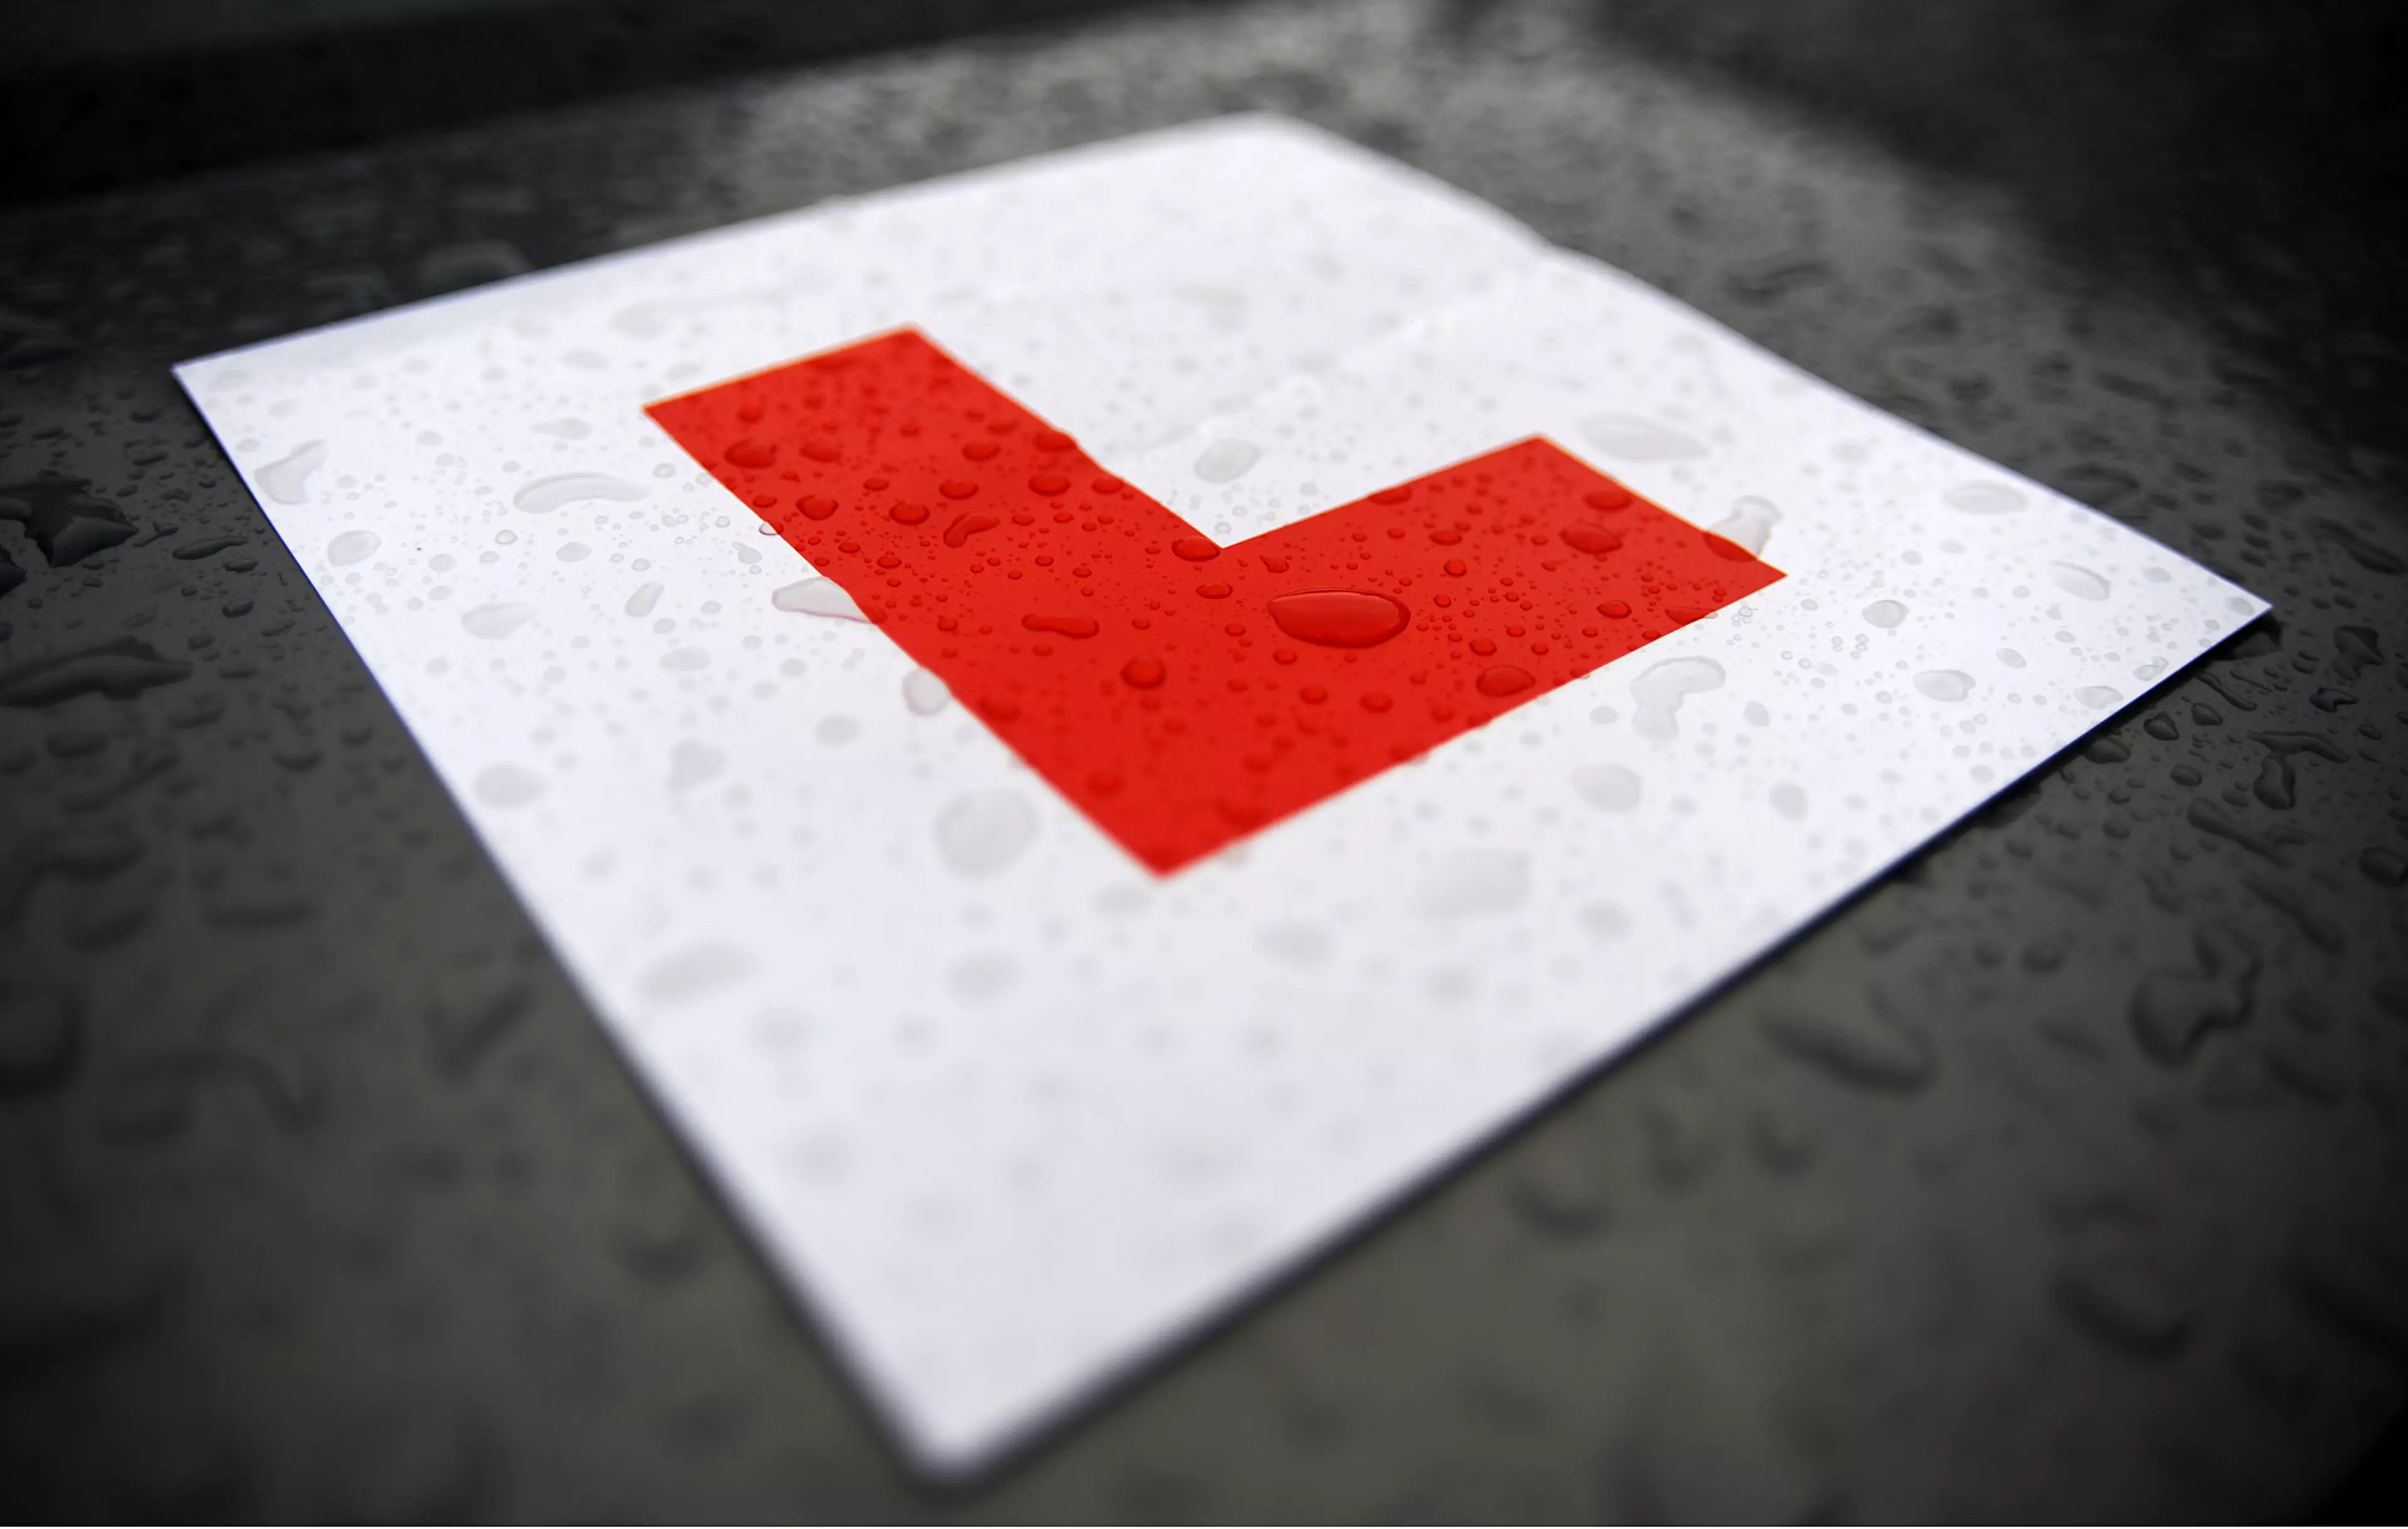 Learner drivers will have to book new theory tests once lockdown is lifted (